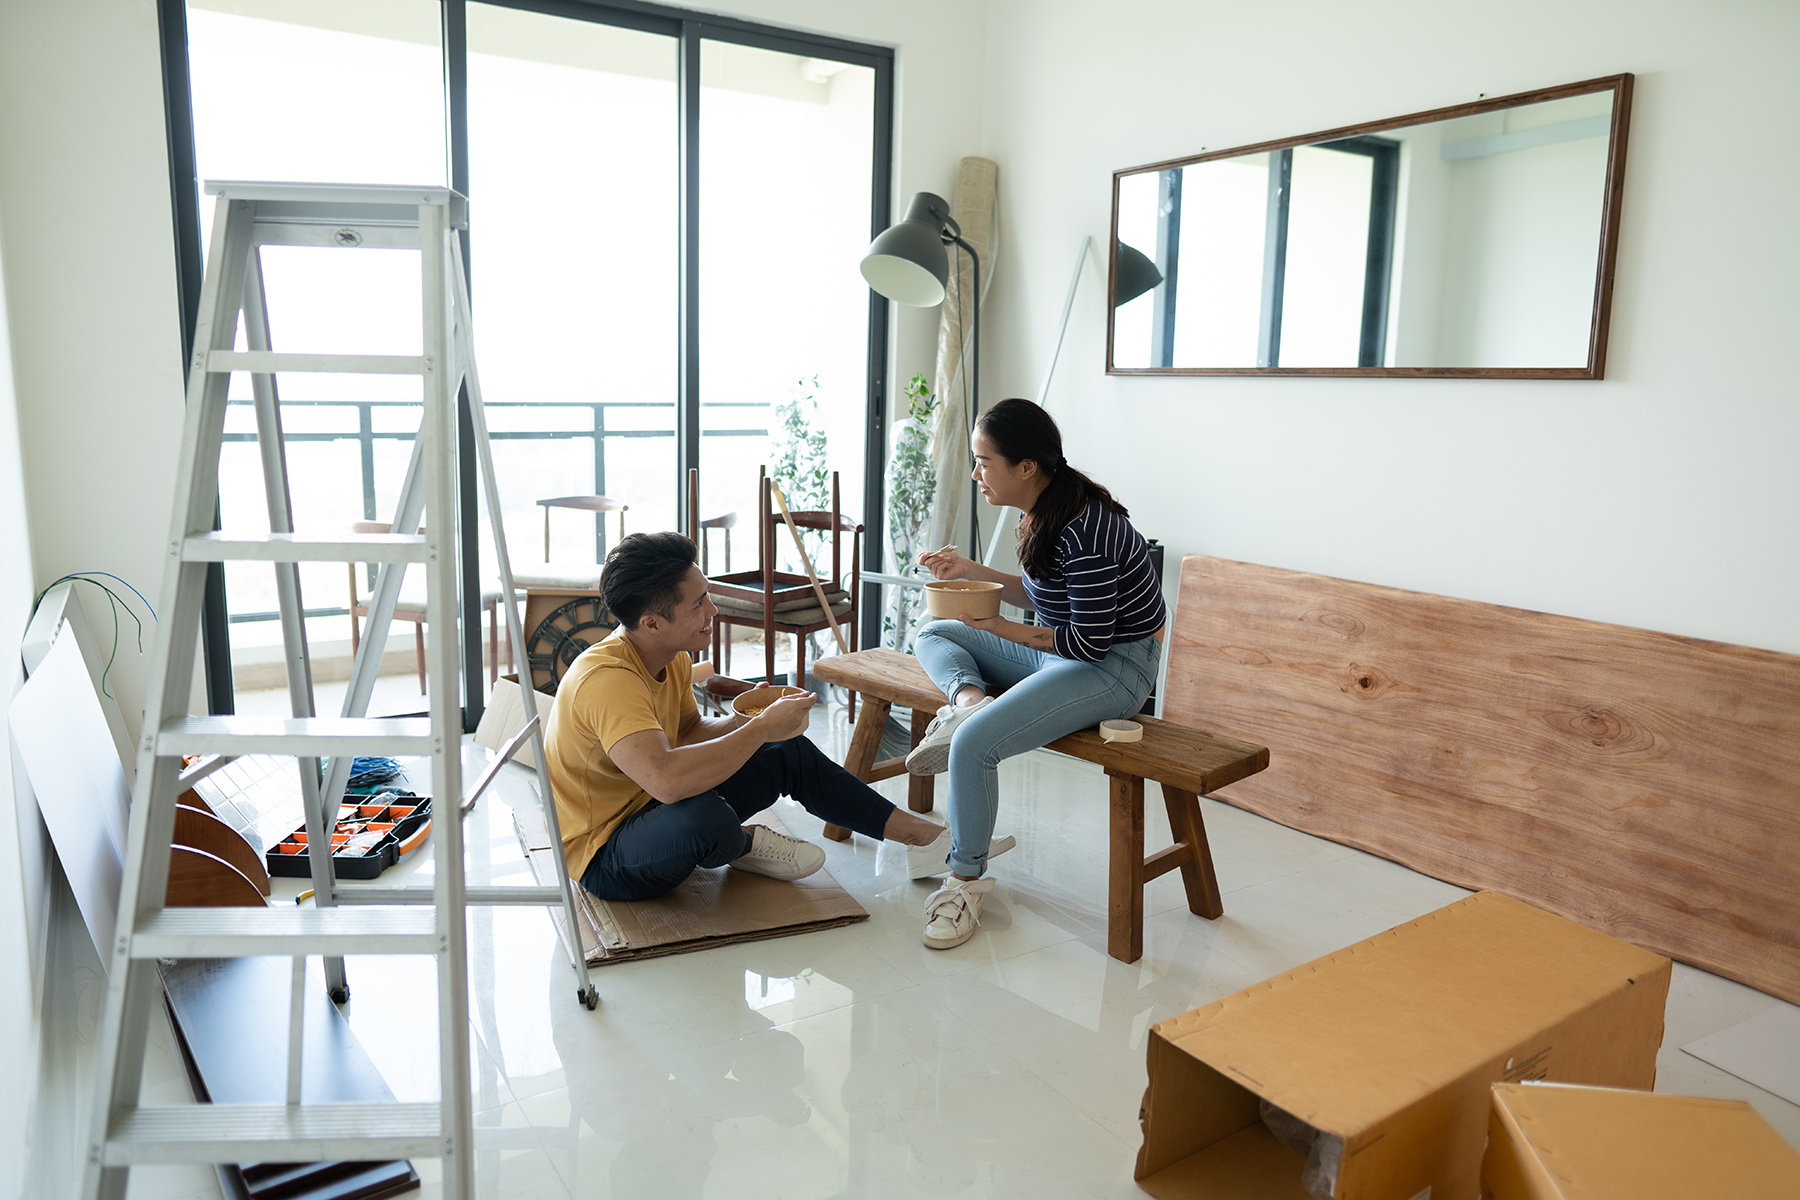 Couple sitting in their empty new home, boxes and ladder standing around, eating lunch

